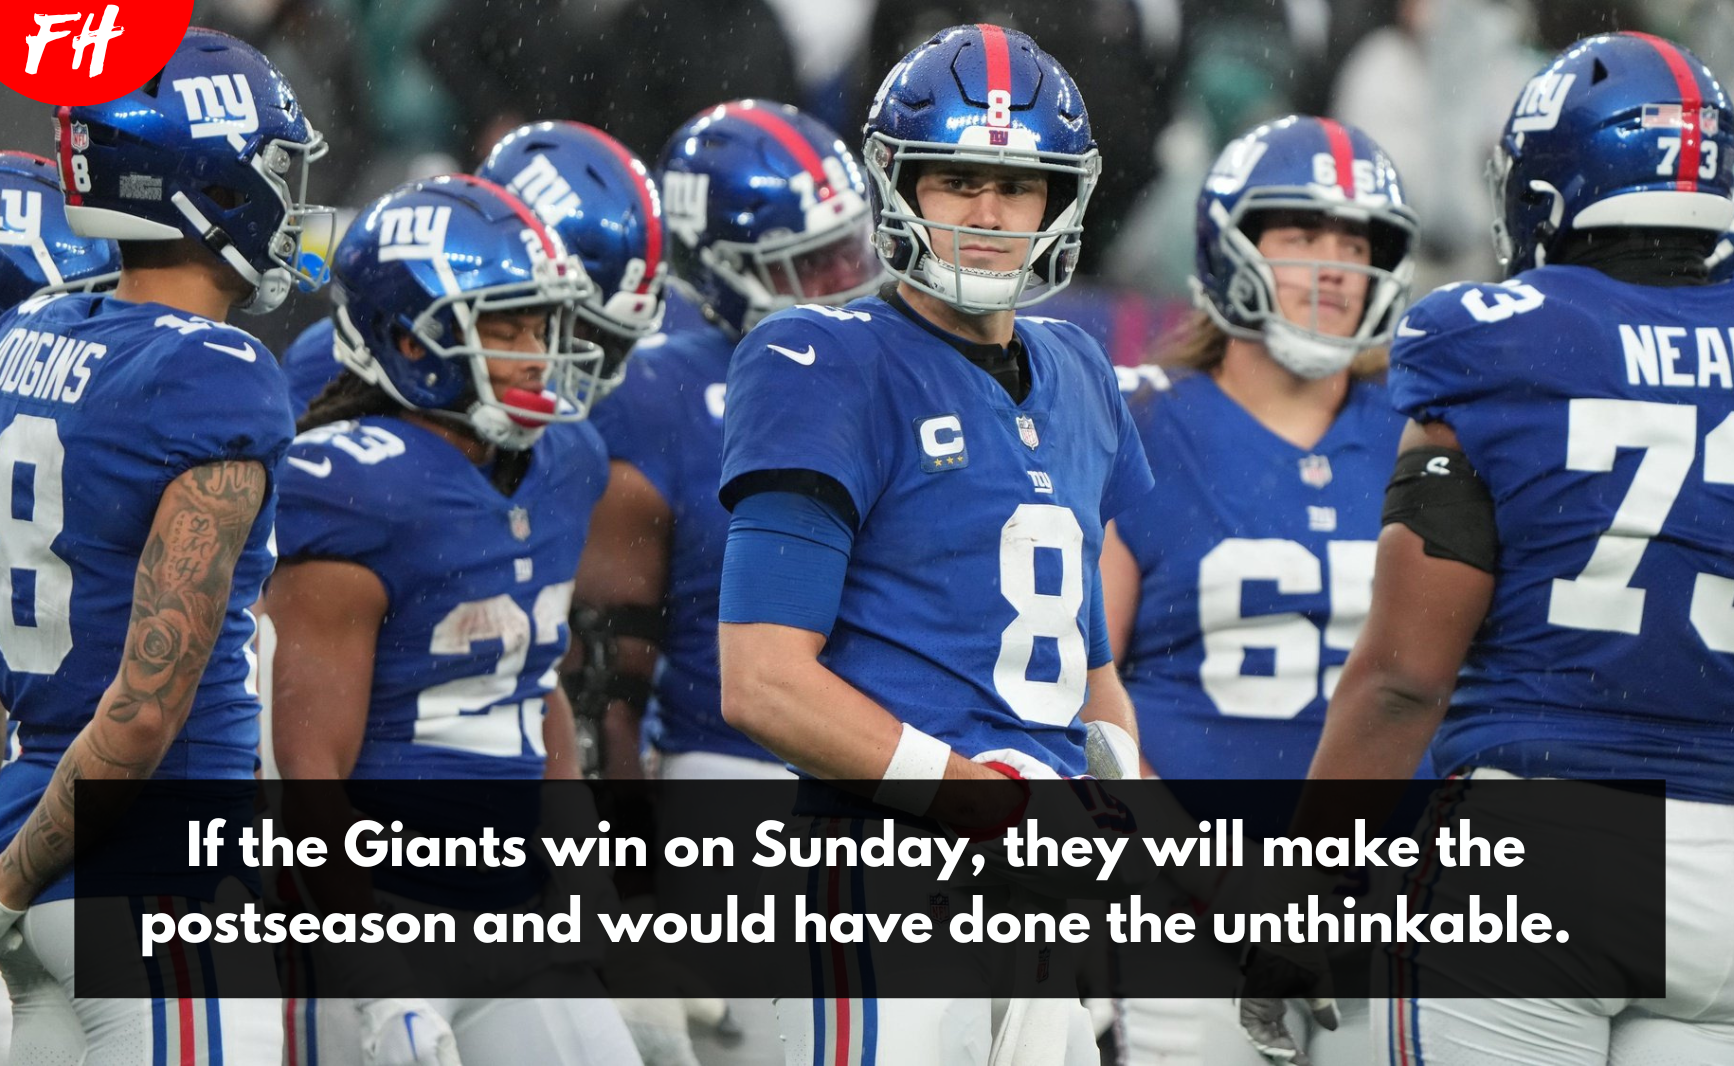 If the Giants win on Sunday, they will make the postseason and would have done the unthinkable.